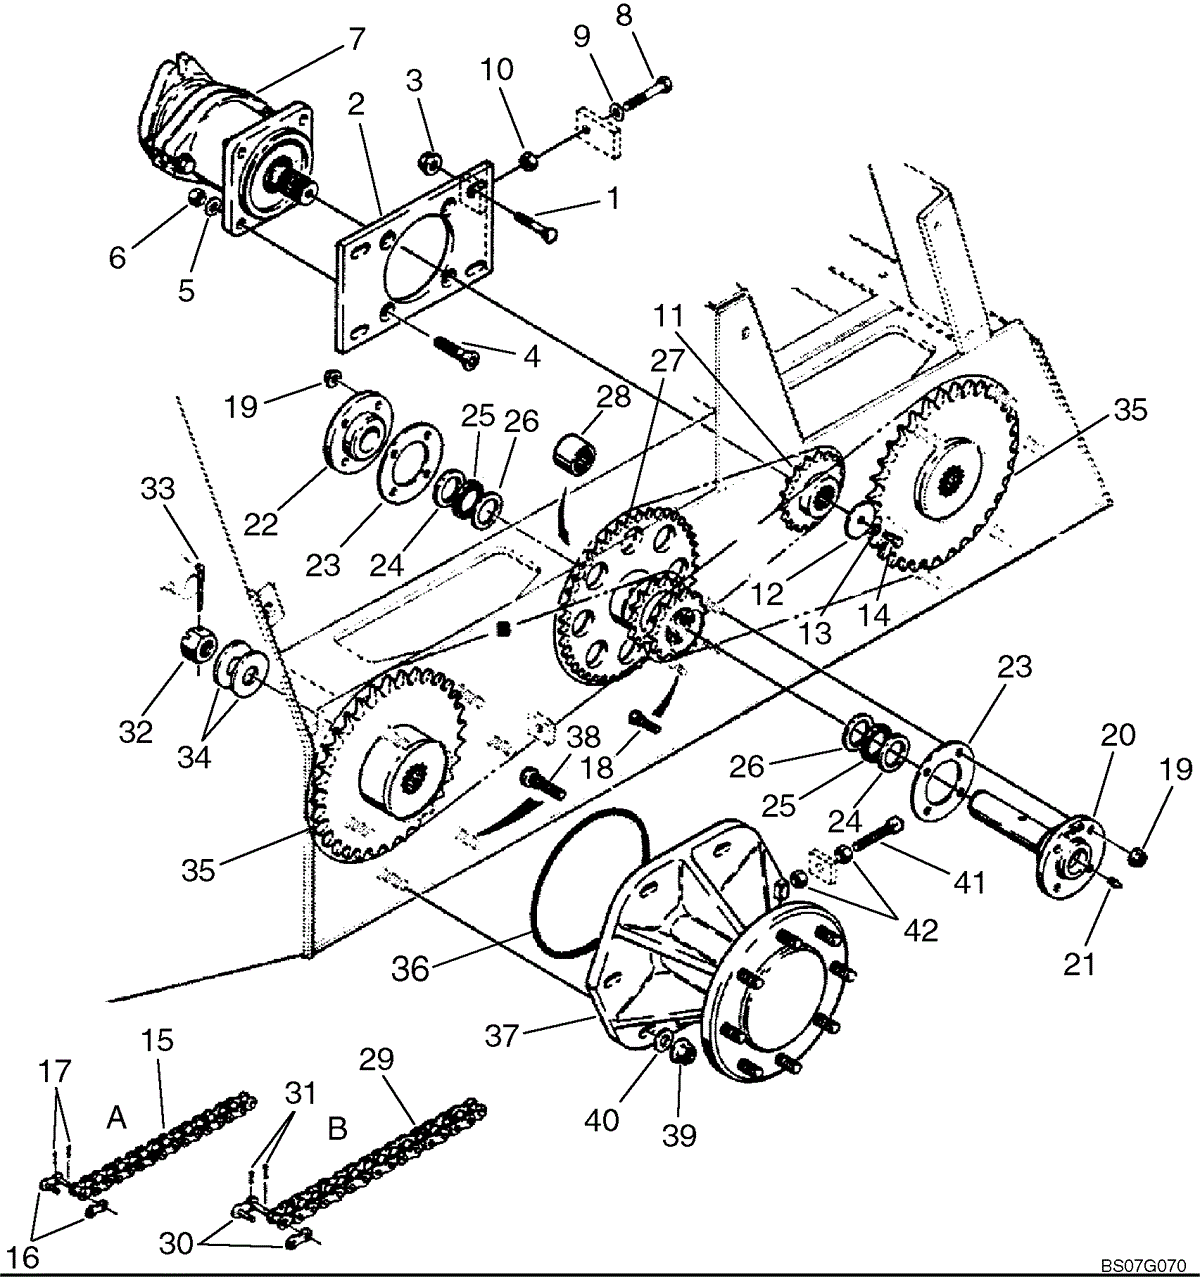 Parts for Case 1845 Uniloaders/Skid Steer Loaders case 1845c wiring schematic 